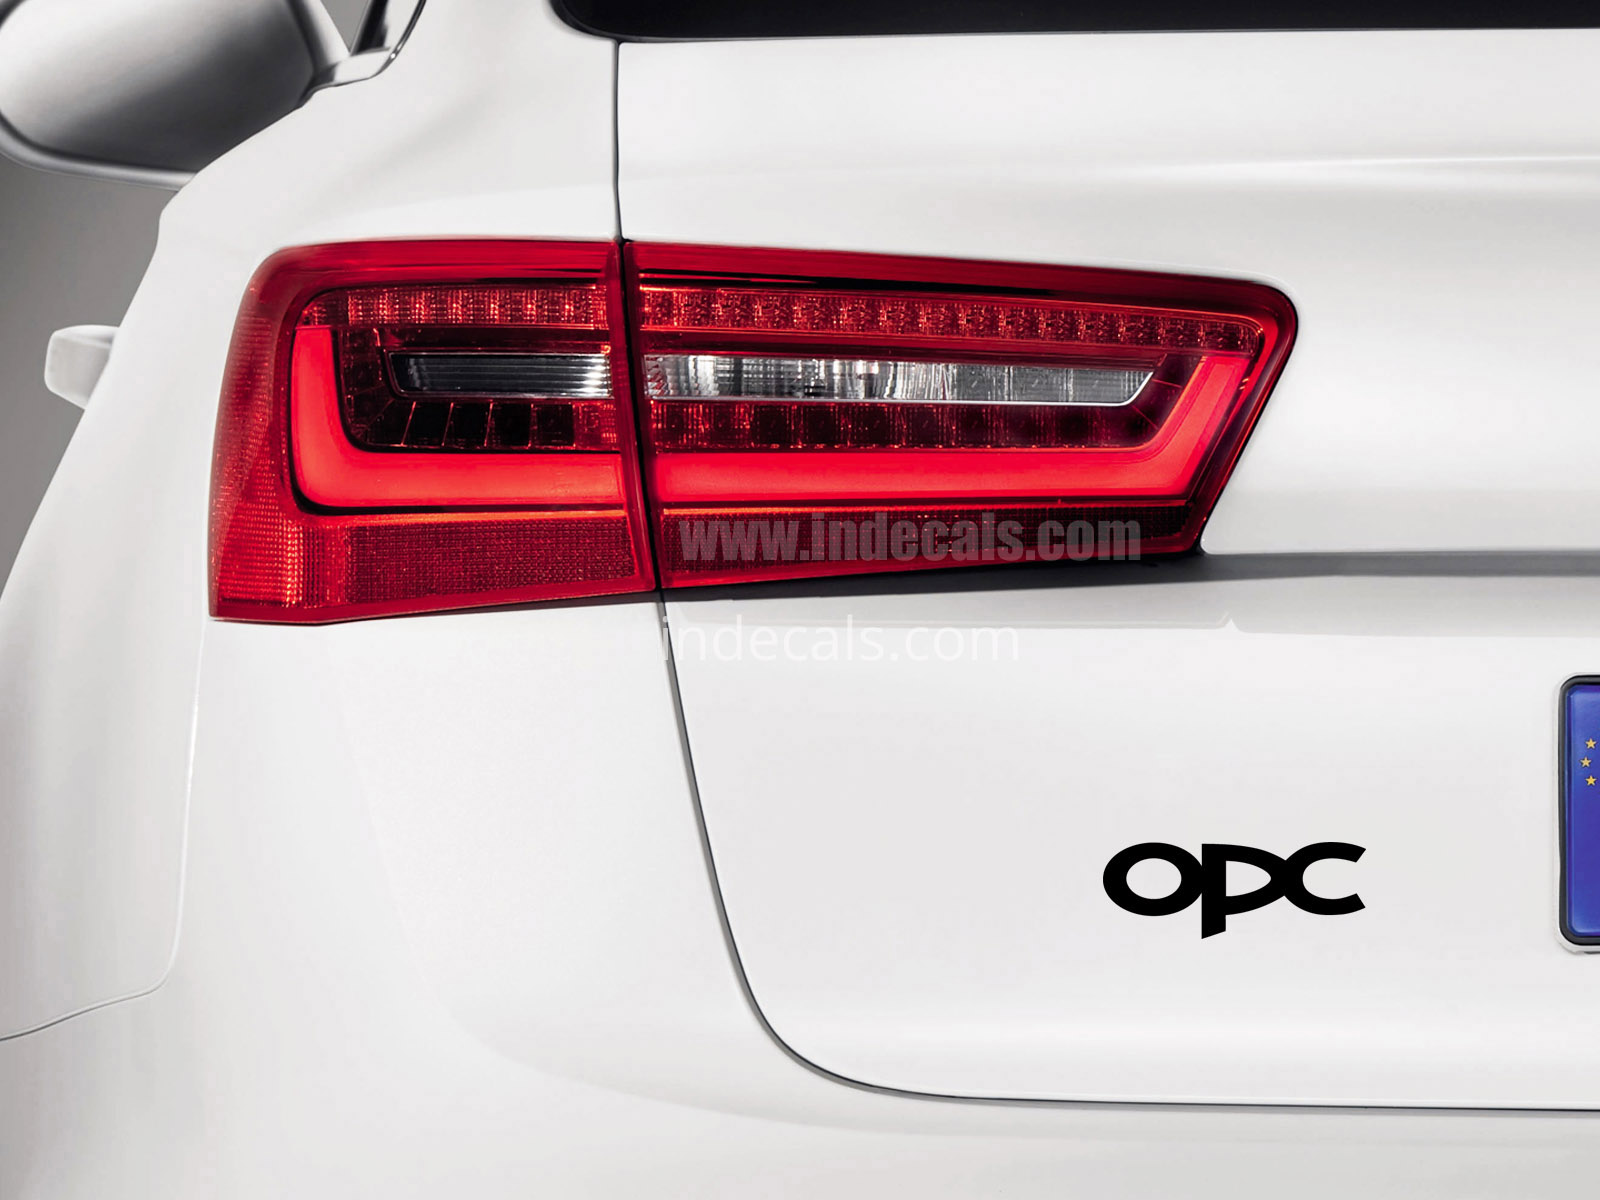 3 x Opel OPC Stickers for Trunk - Black